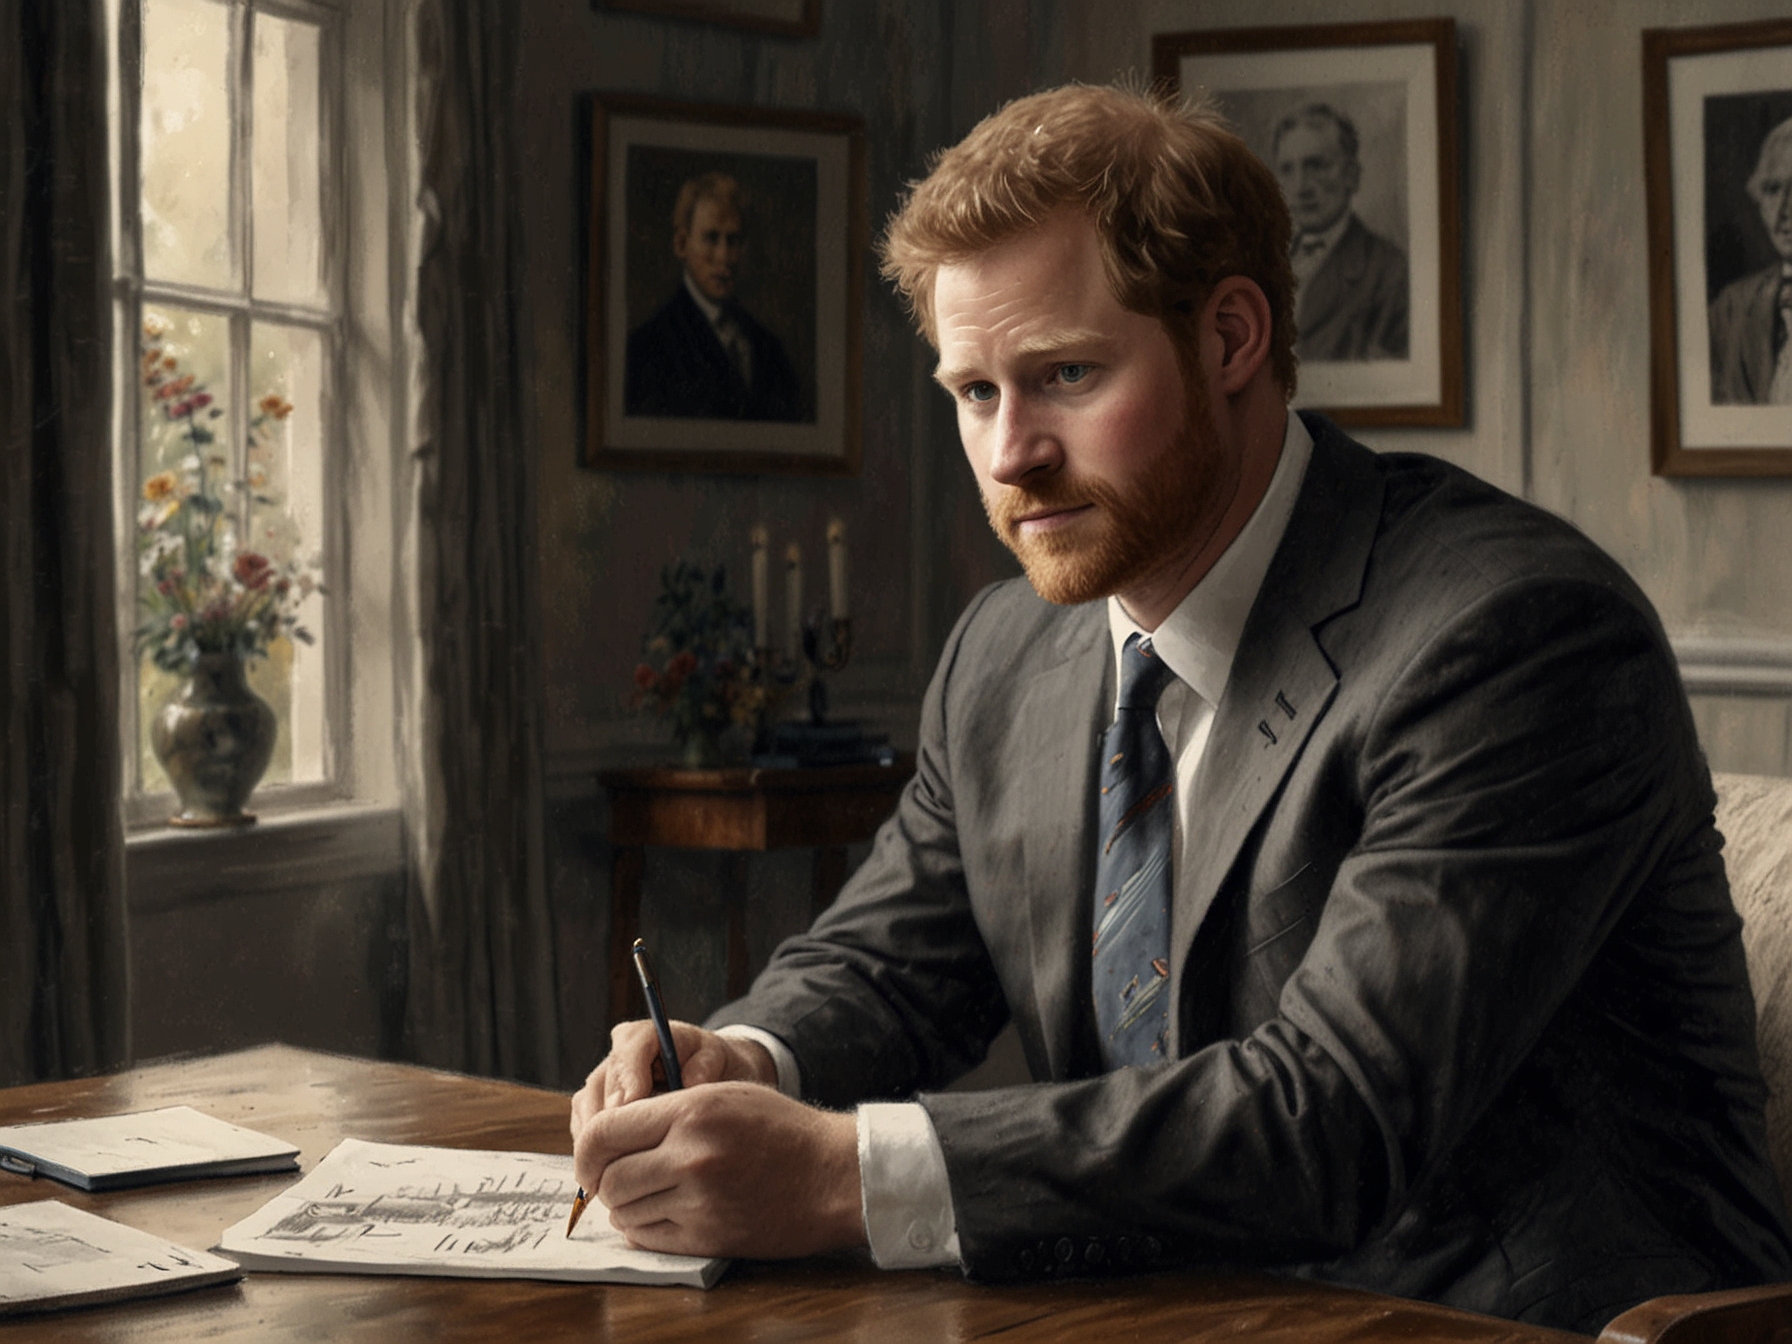 Prince Harry, in a candid moment, reaches out to his father, King Charles, offering a heartfelt gesture of reconciliation amidst the latter's health challenges.